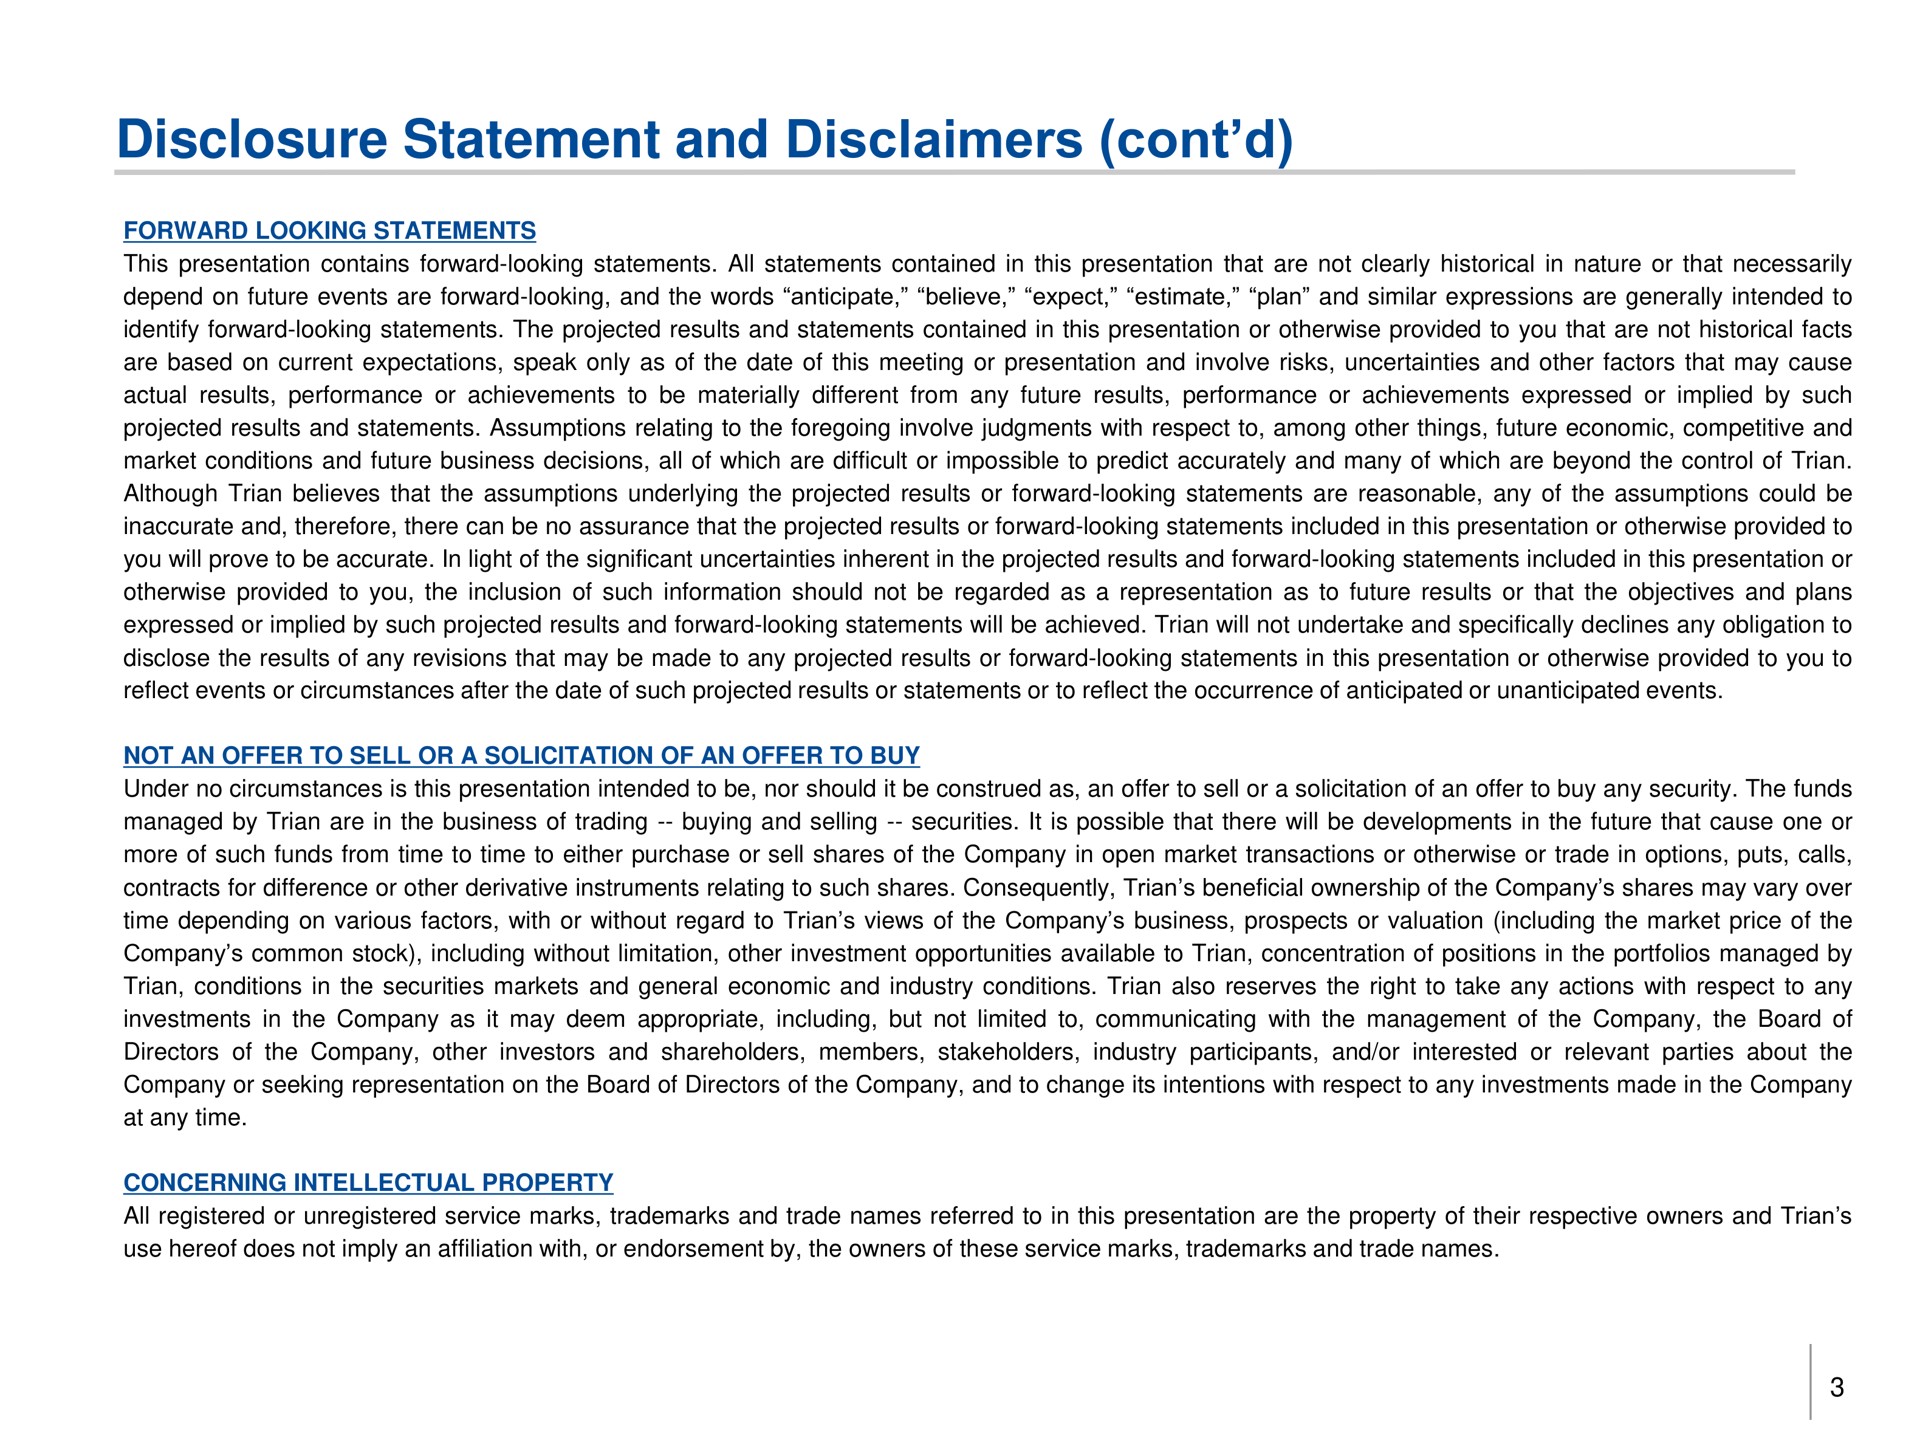 disclosure statement and disclaimers | Trian Partners